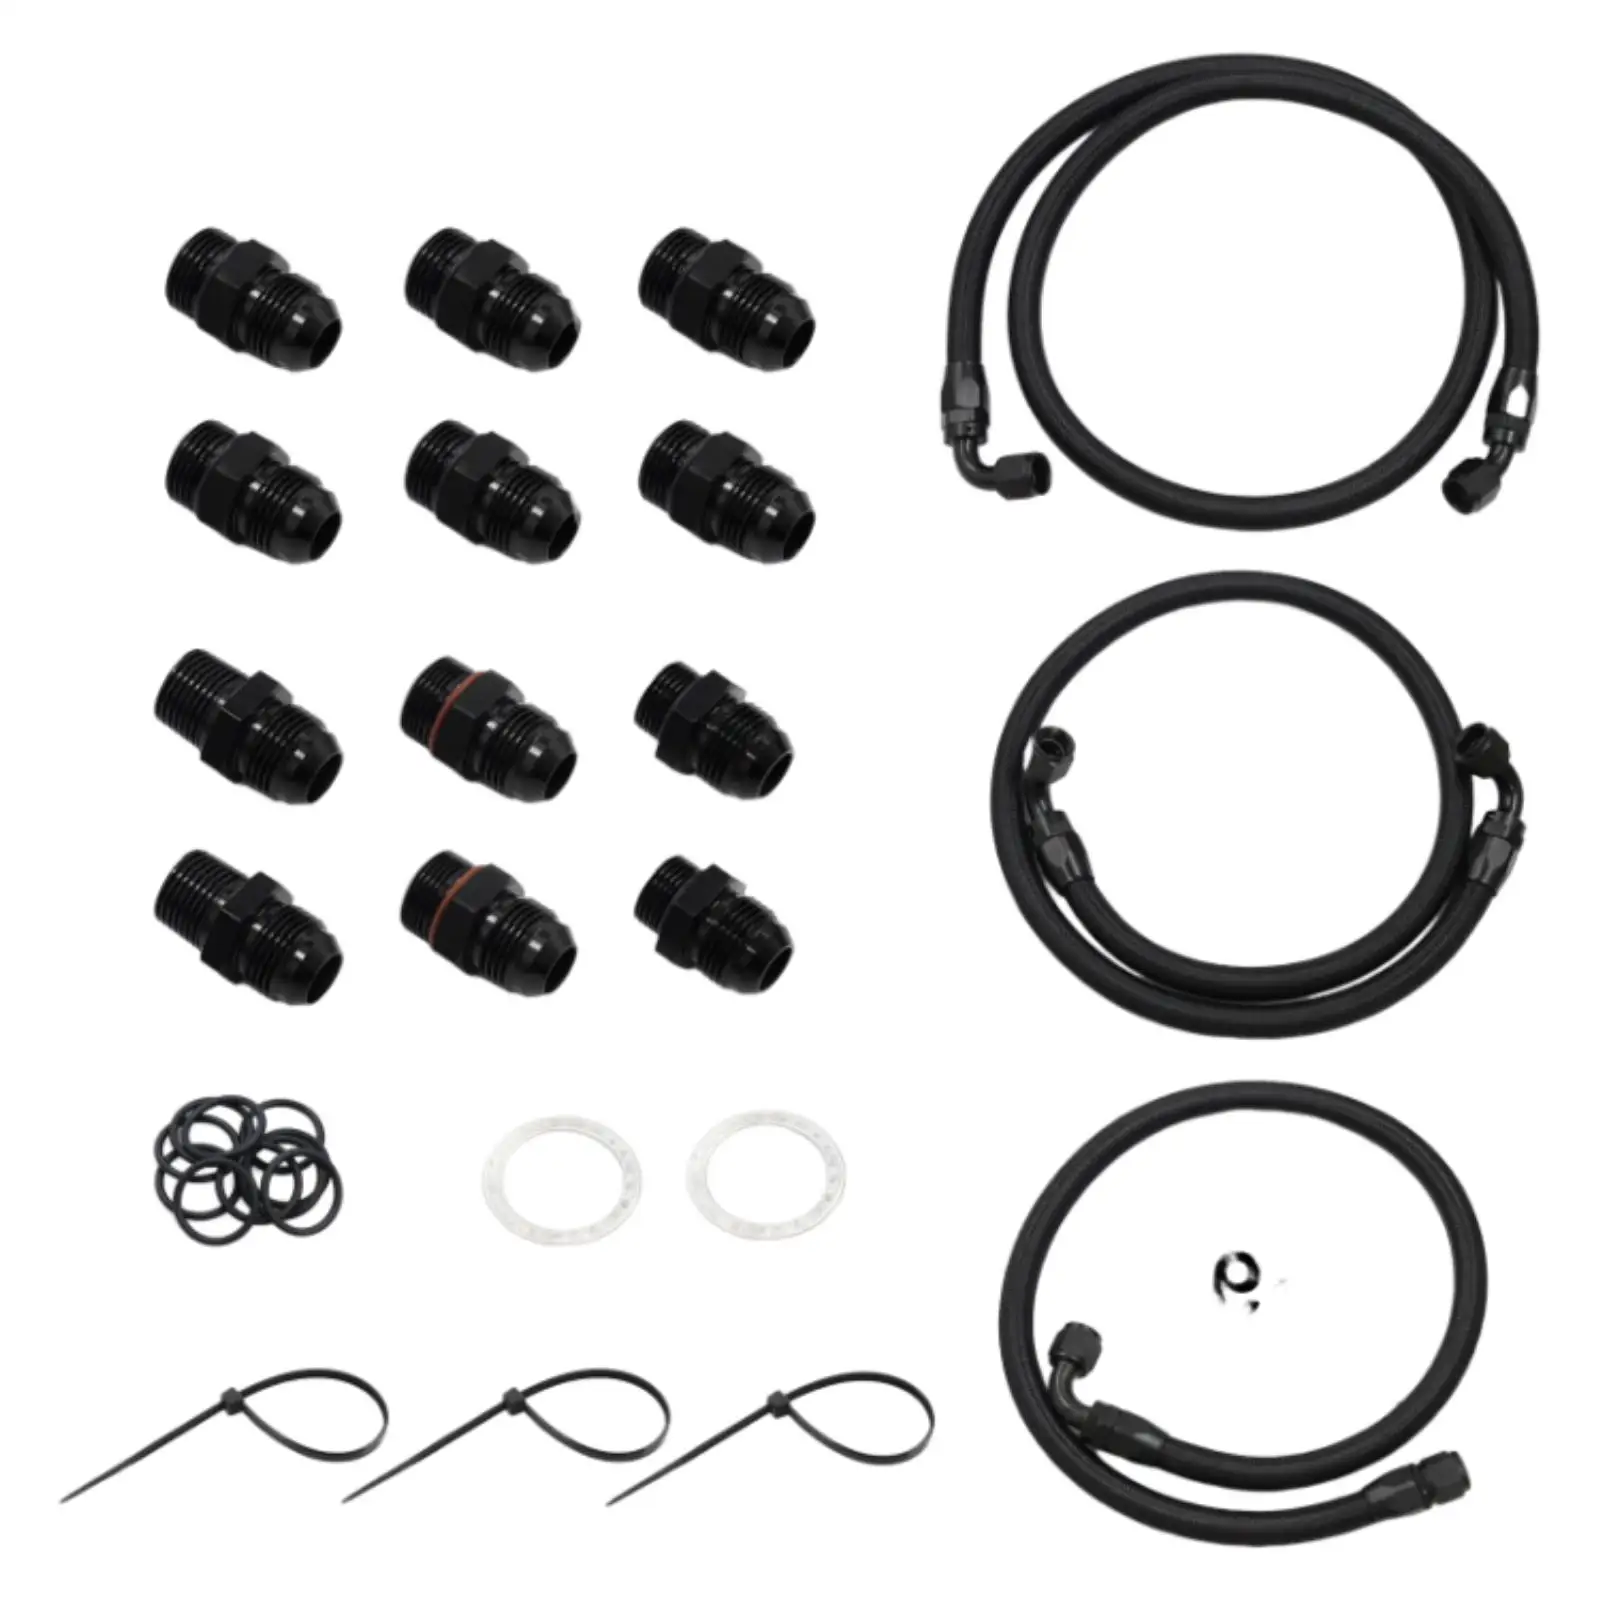 Transmission Cooler Hose Line Kit with Adapters Durable Replacement Accessories for GM 2001 to 2005 6.6 lb7 Lly Duramax